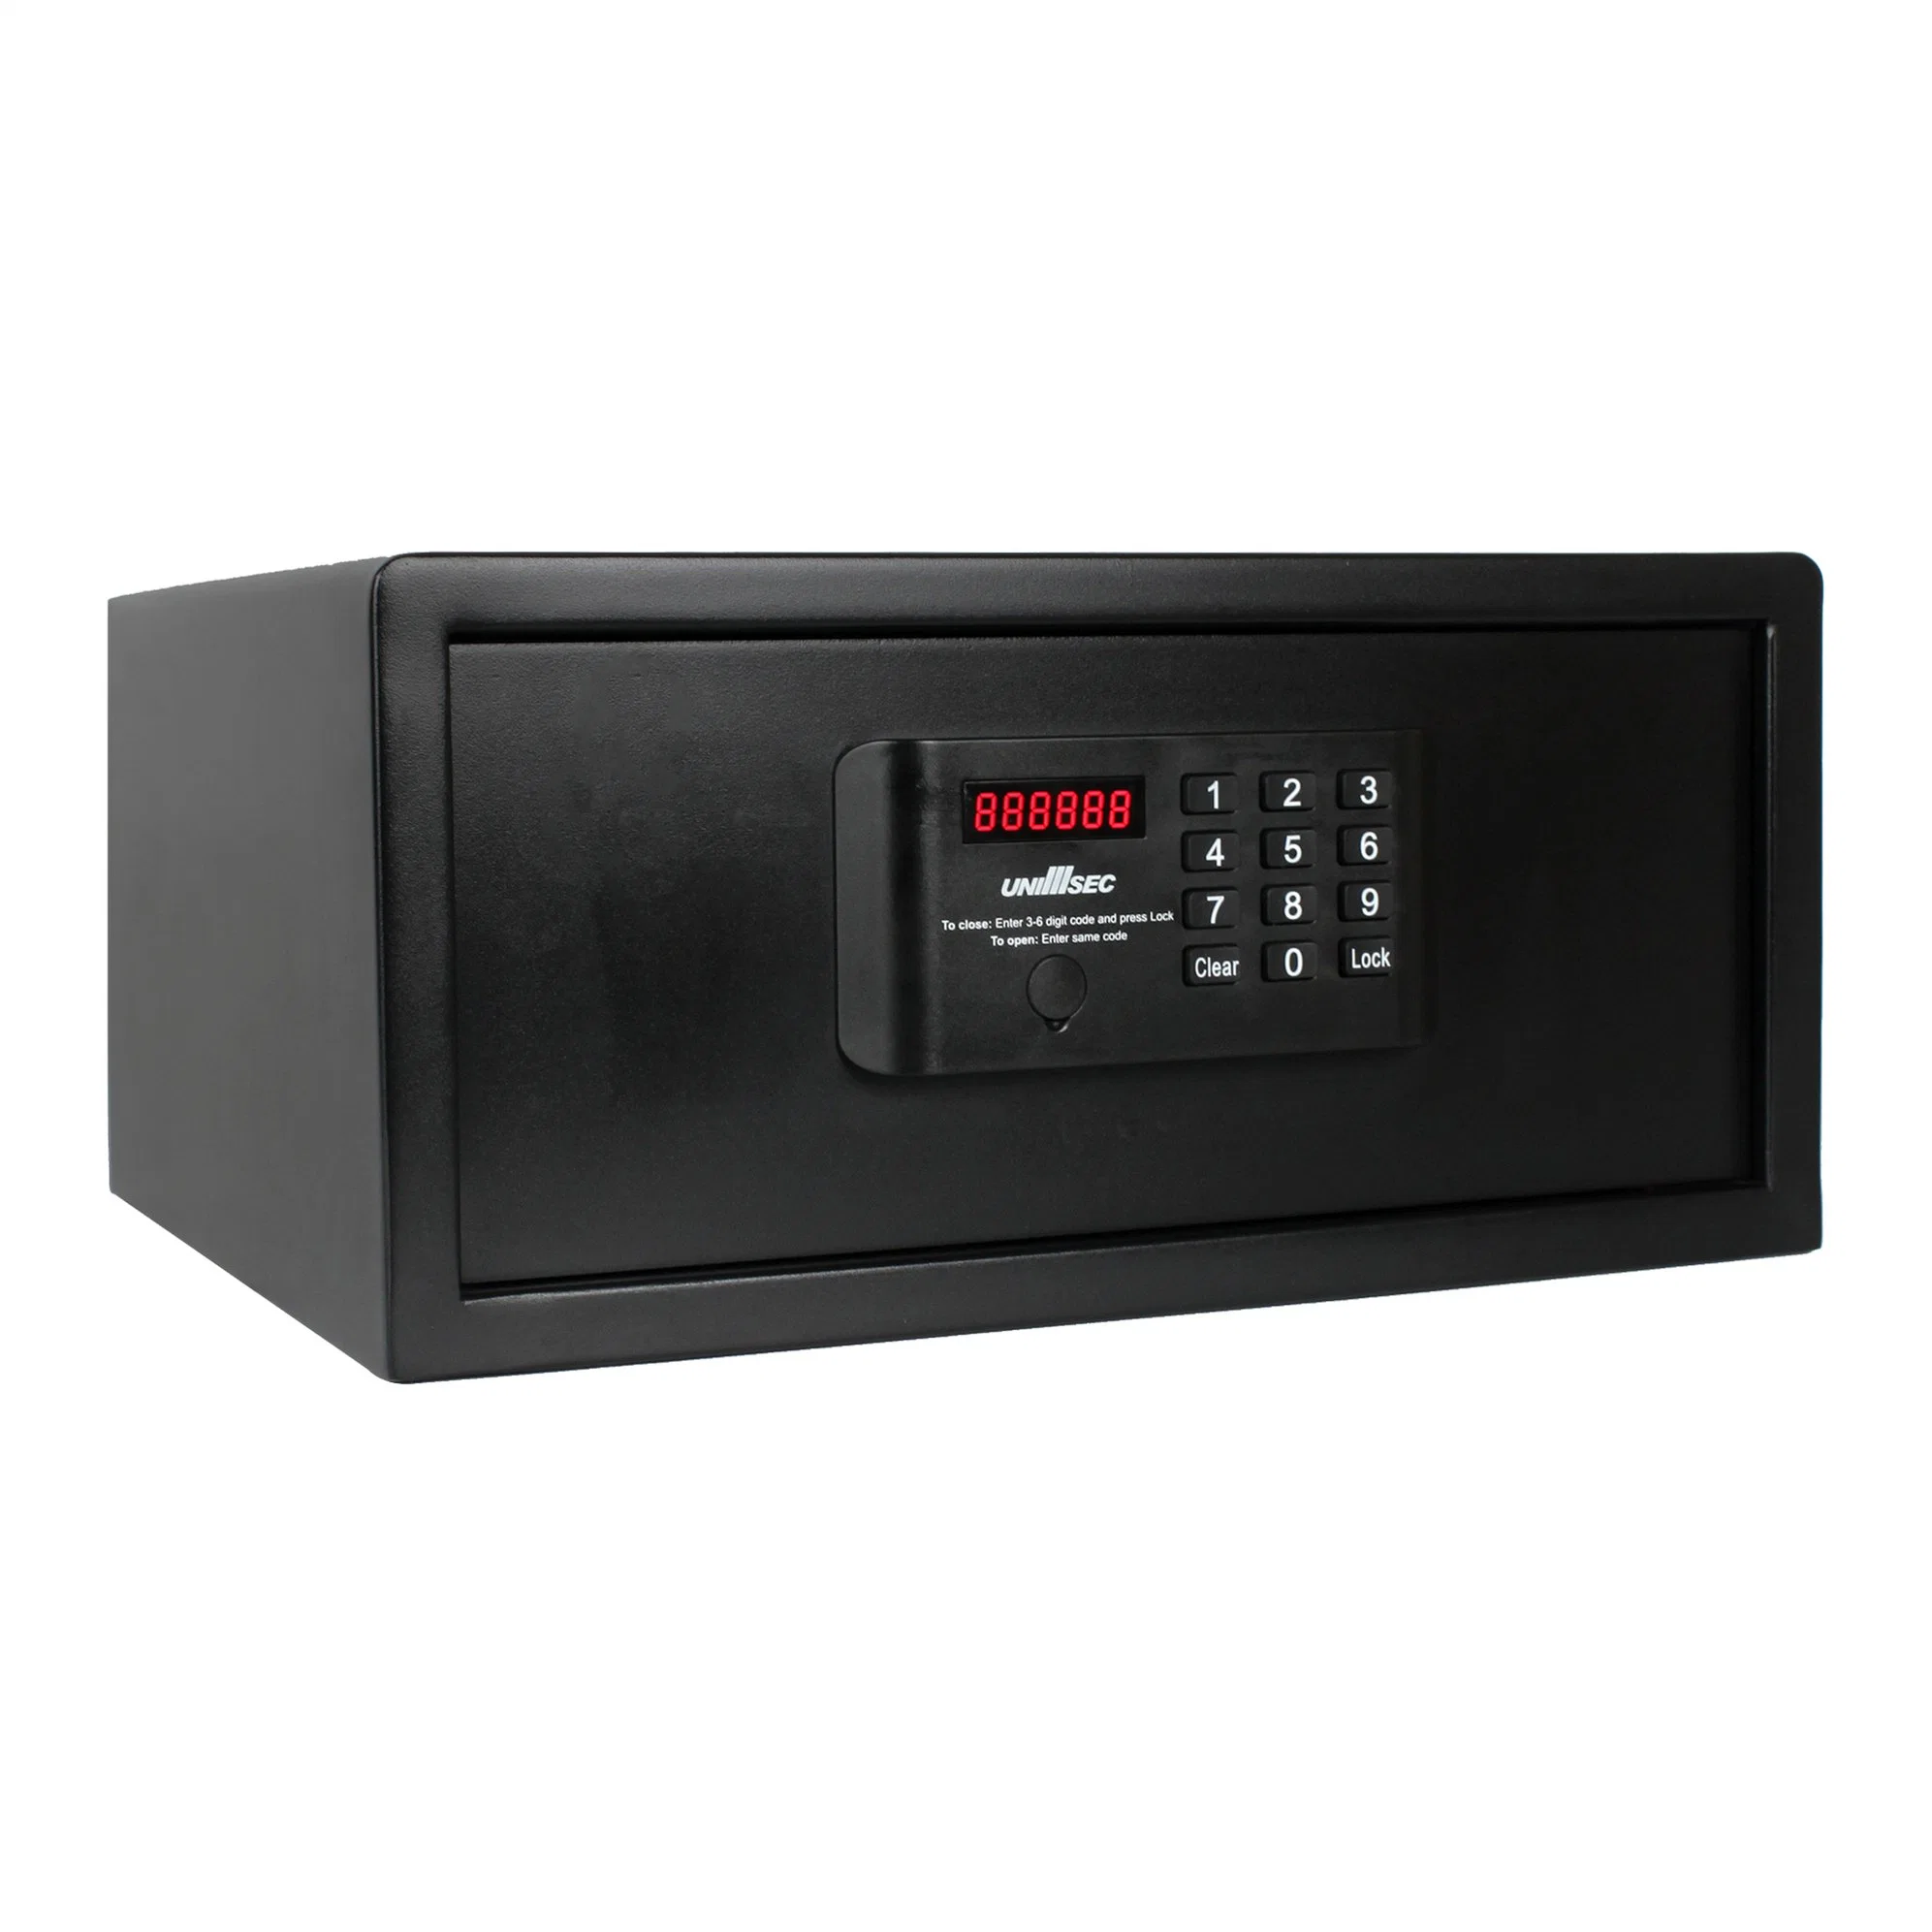 Hotel Room Security Safe Box Alarm Function Digital Safe with Power Supply Memory (USS-2042EYF)